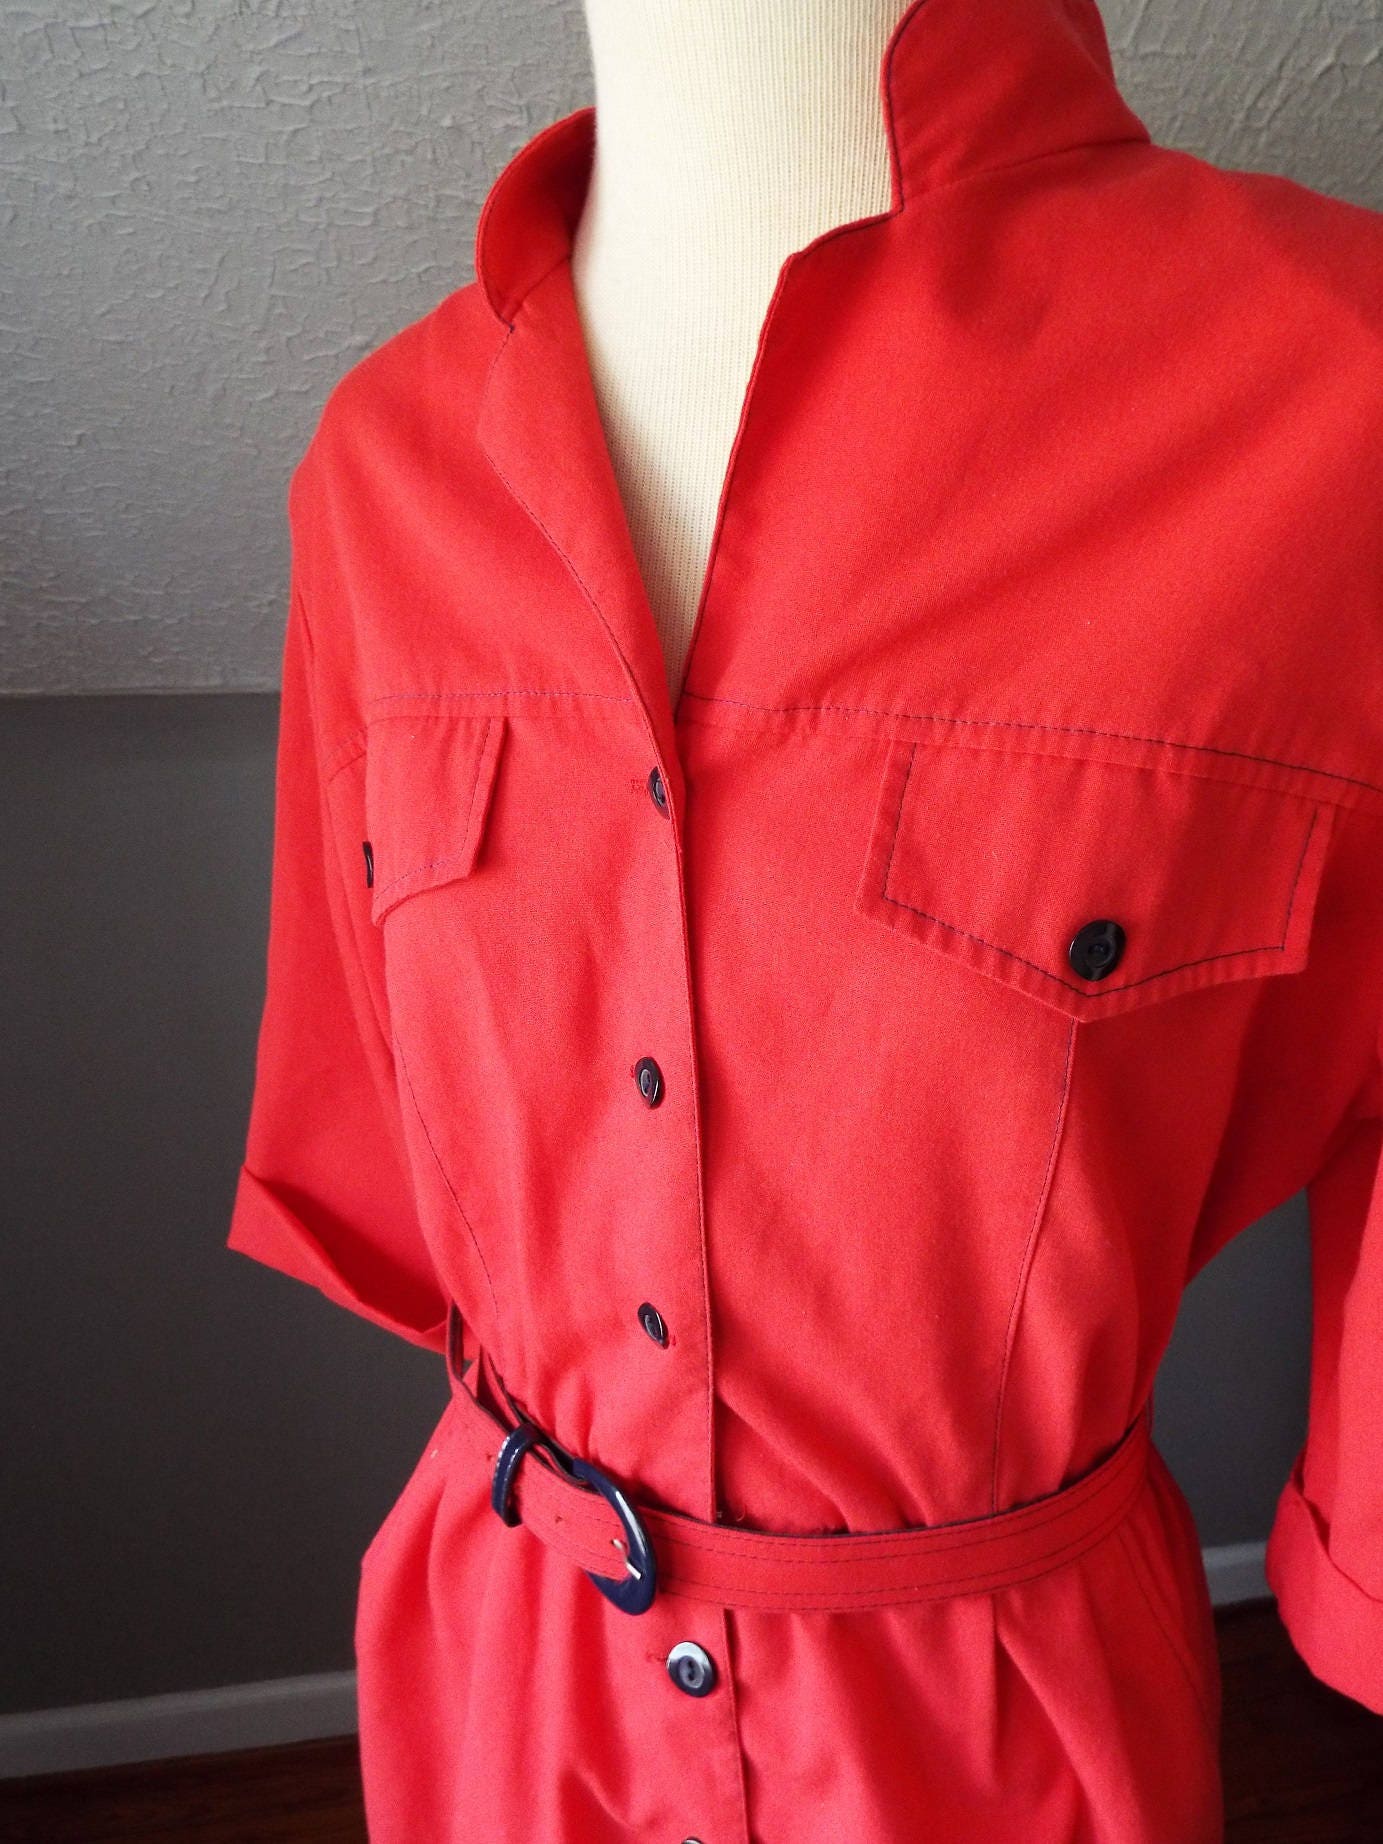 Amazing Vintage Short Sleeve Red Dress by Willi of California